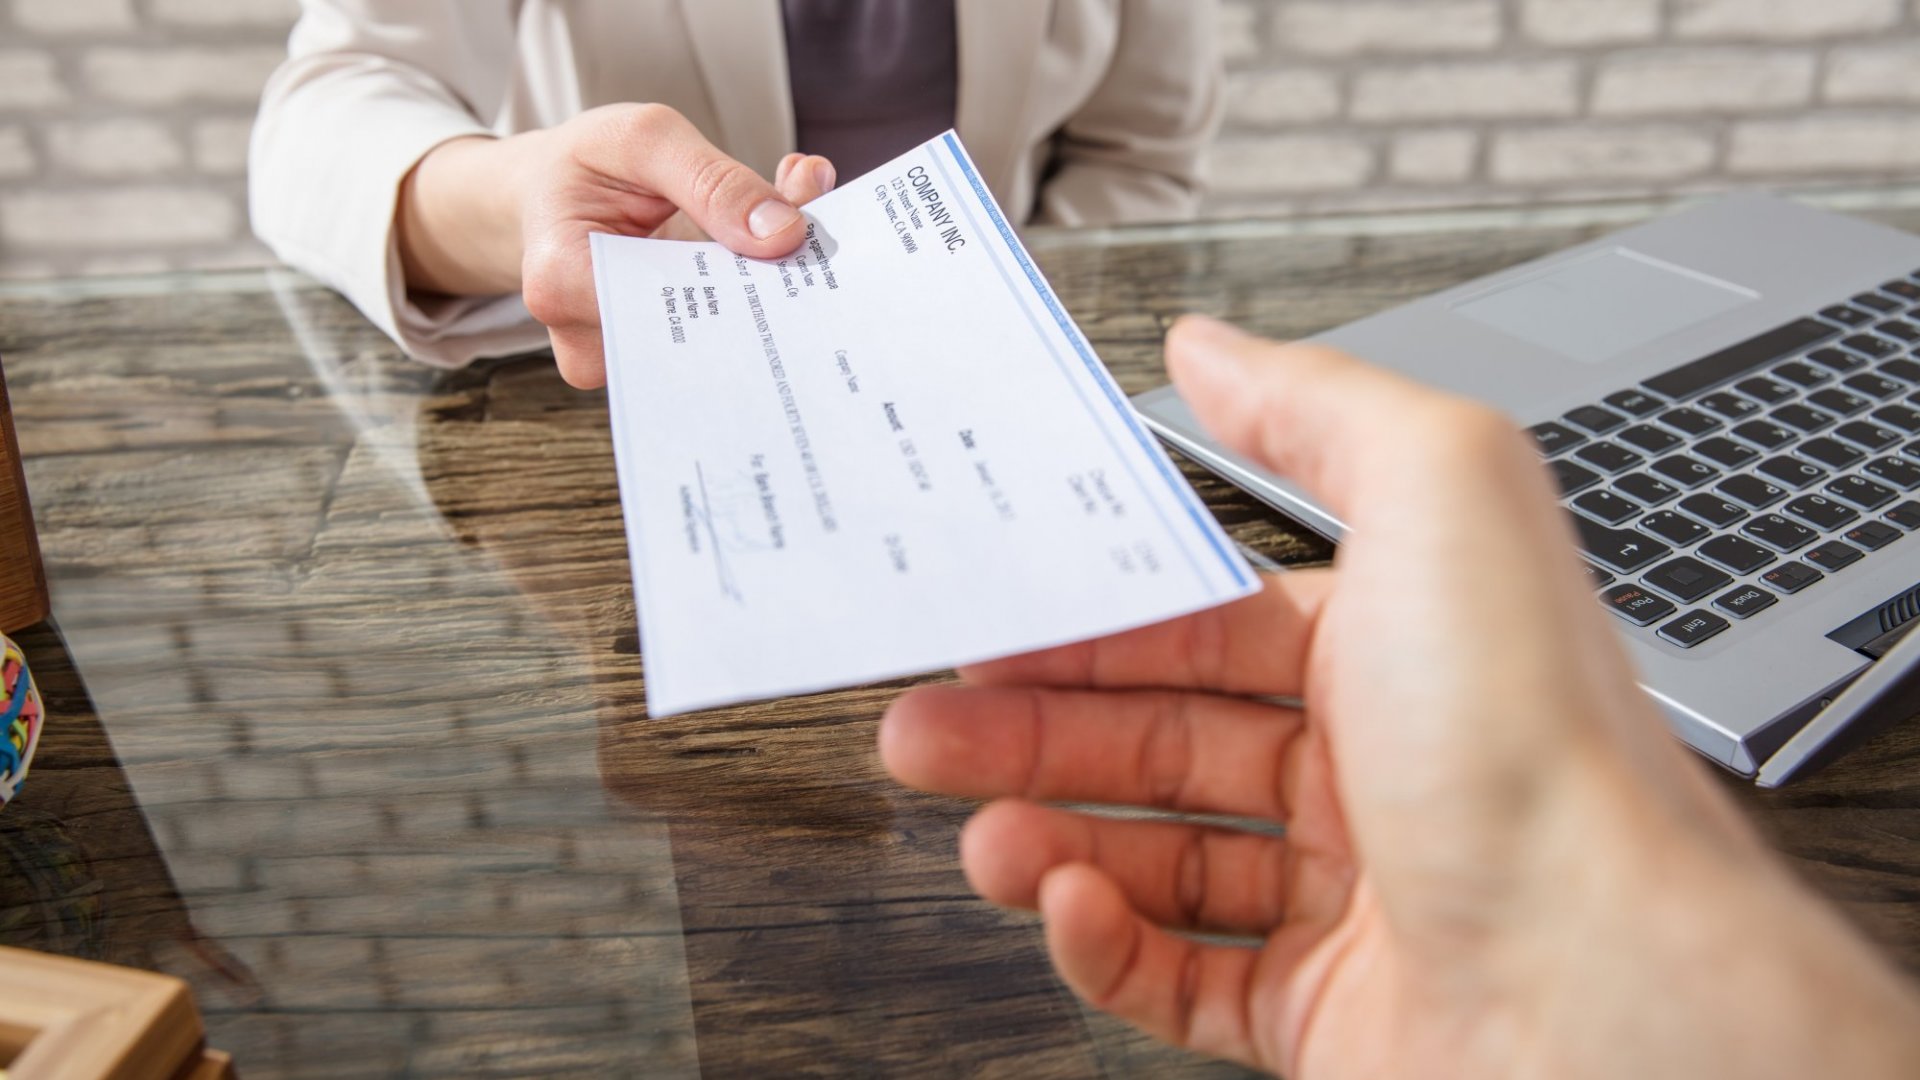 Common Mistakes That Can Cause Your Check to Bounce